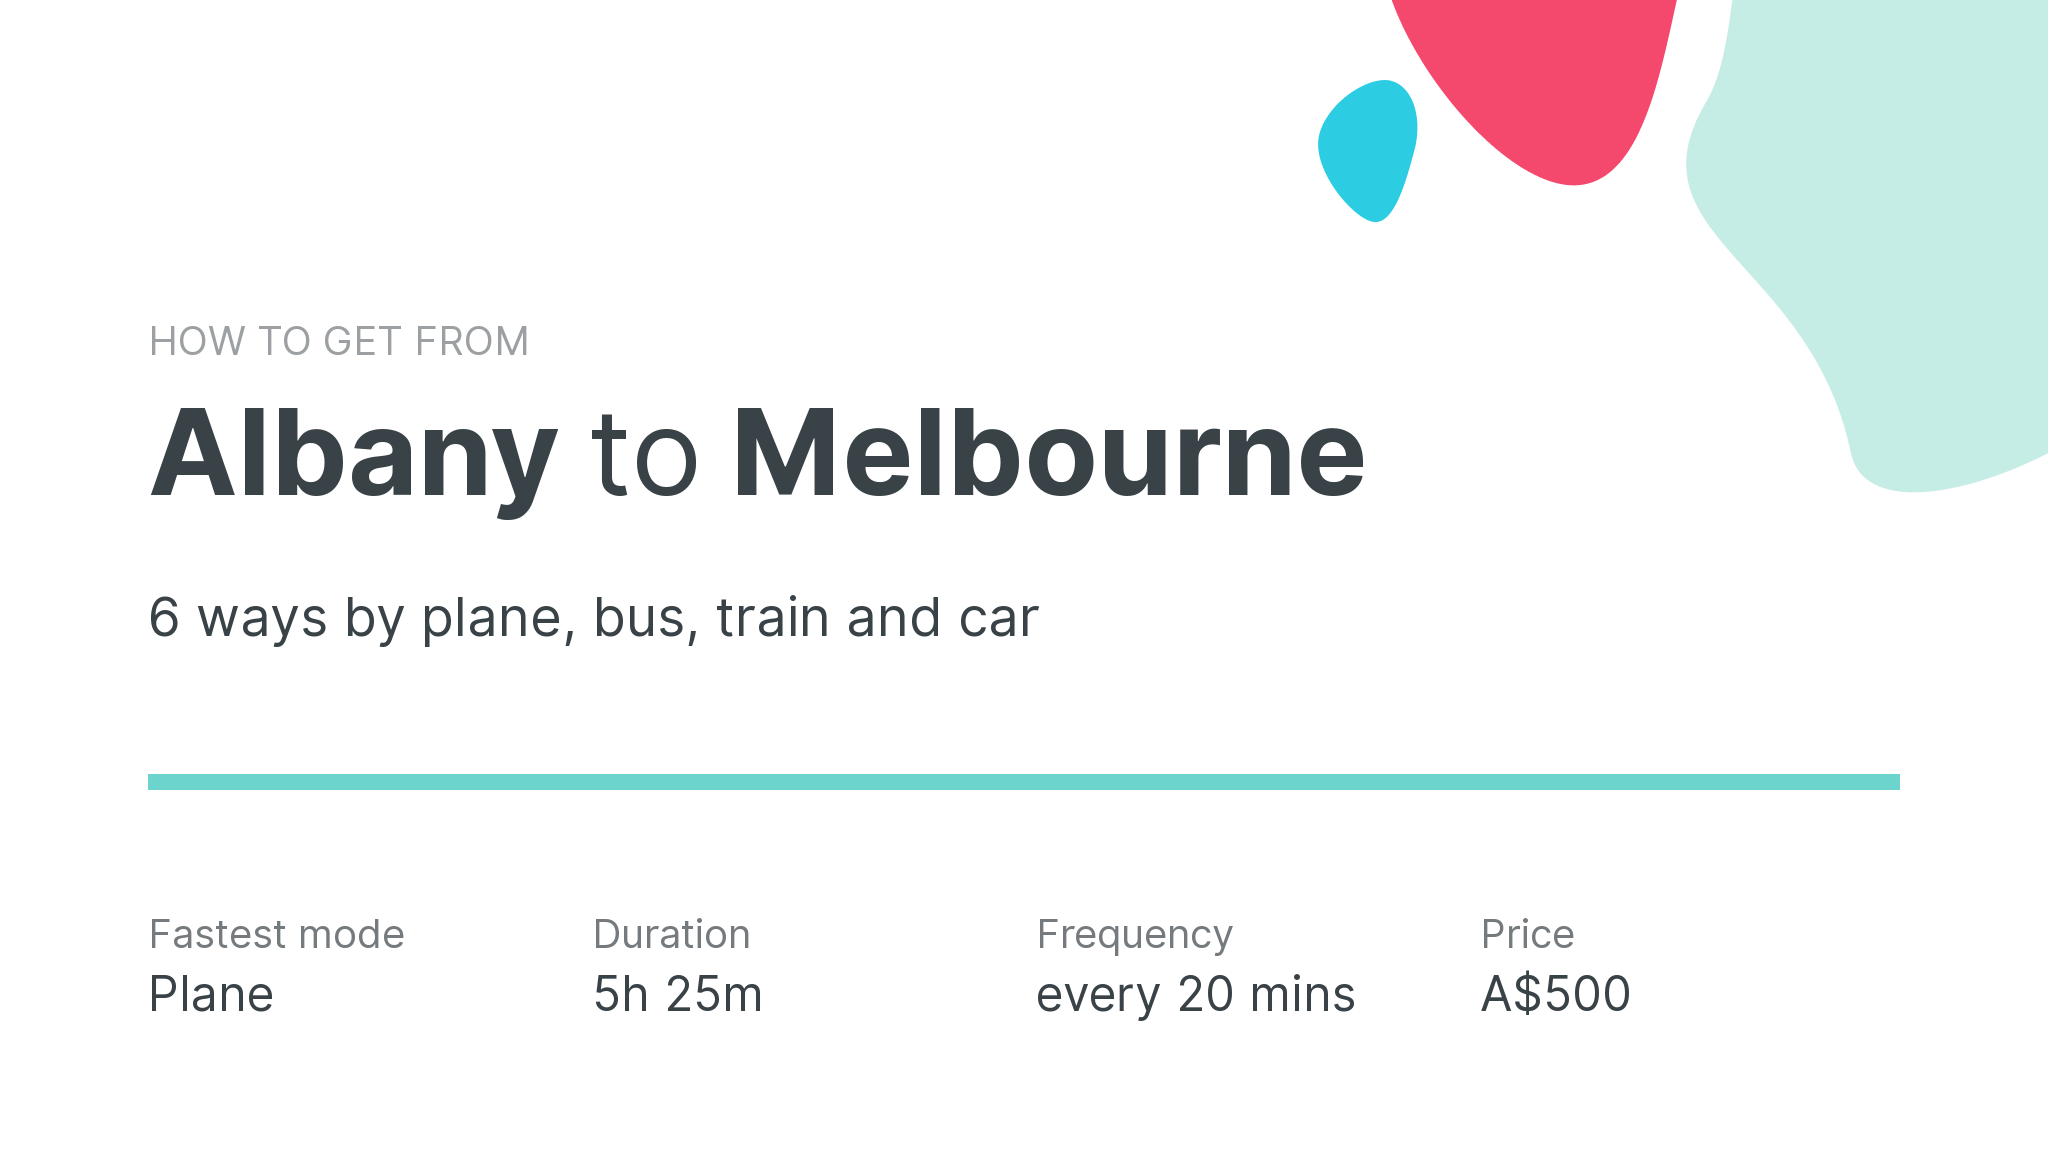 How do I get from Albany to Melbourne